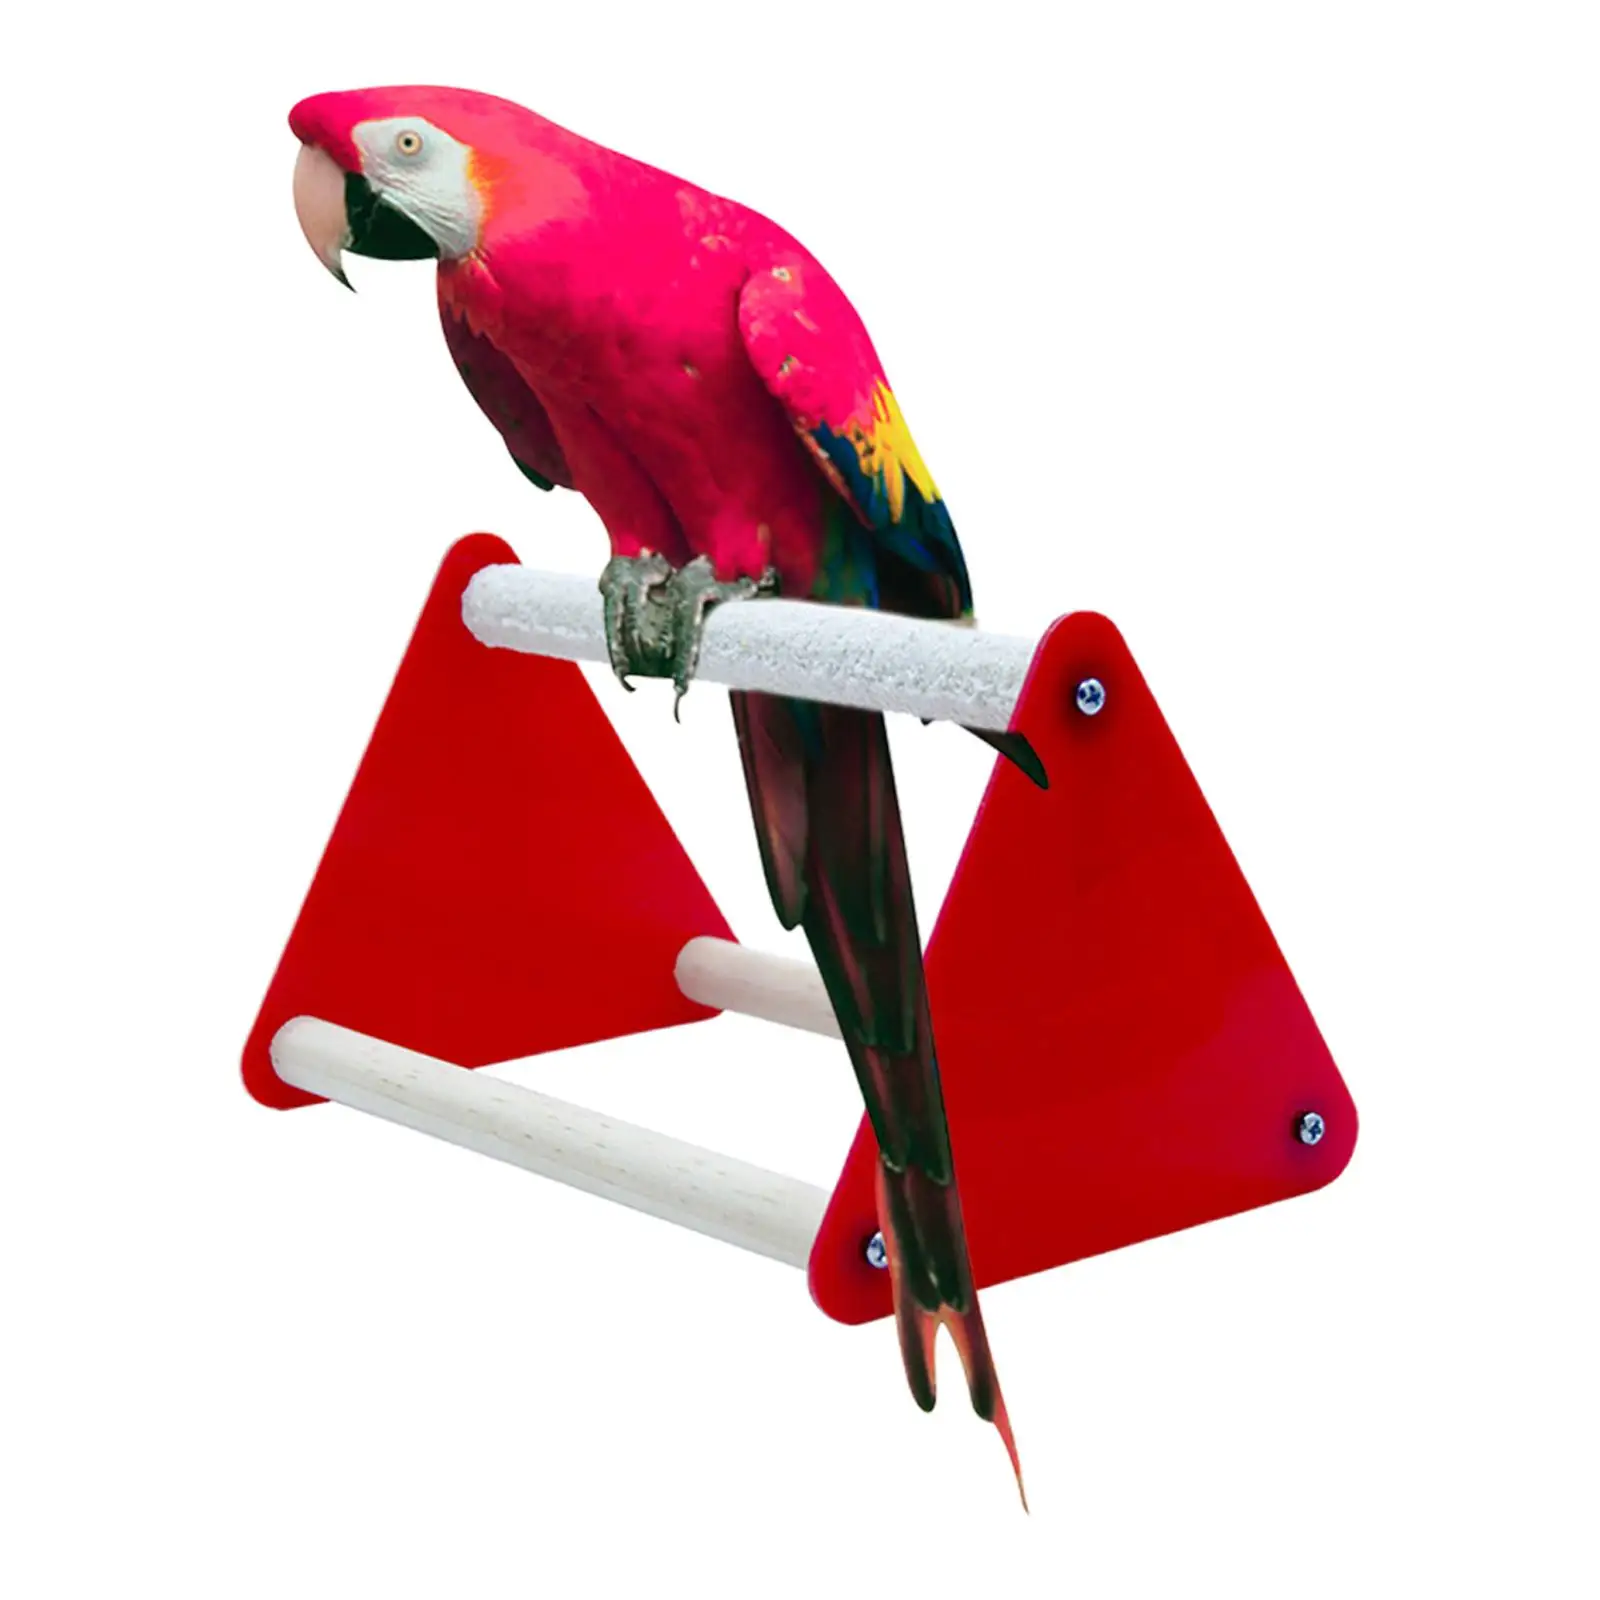 Parrot Playstand Bird Training Roosting Bar Pet Parrot Playstand for Macaw Finch Parakeet